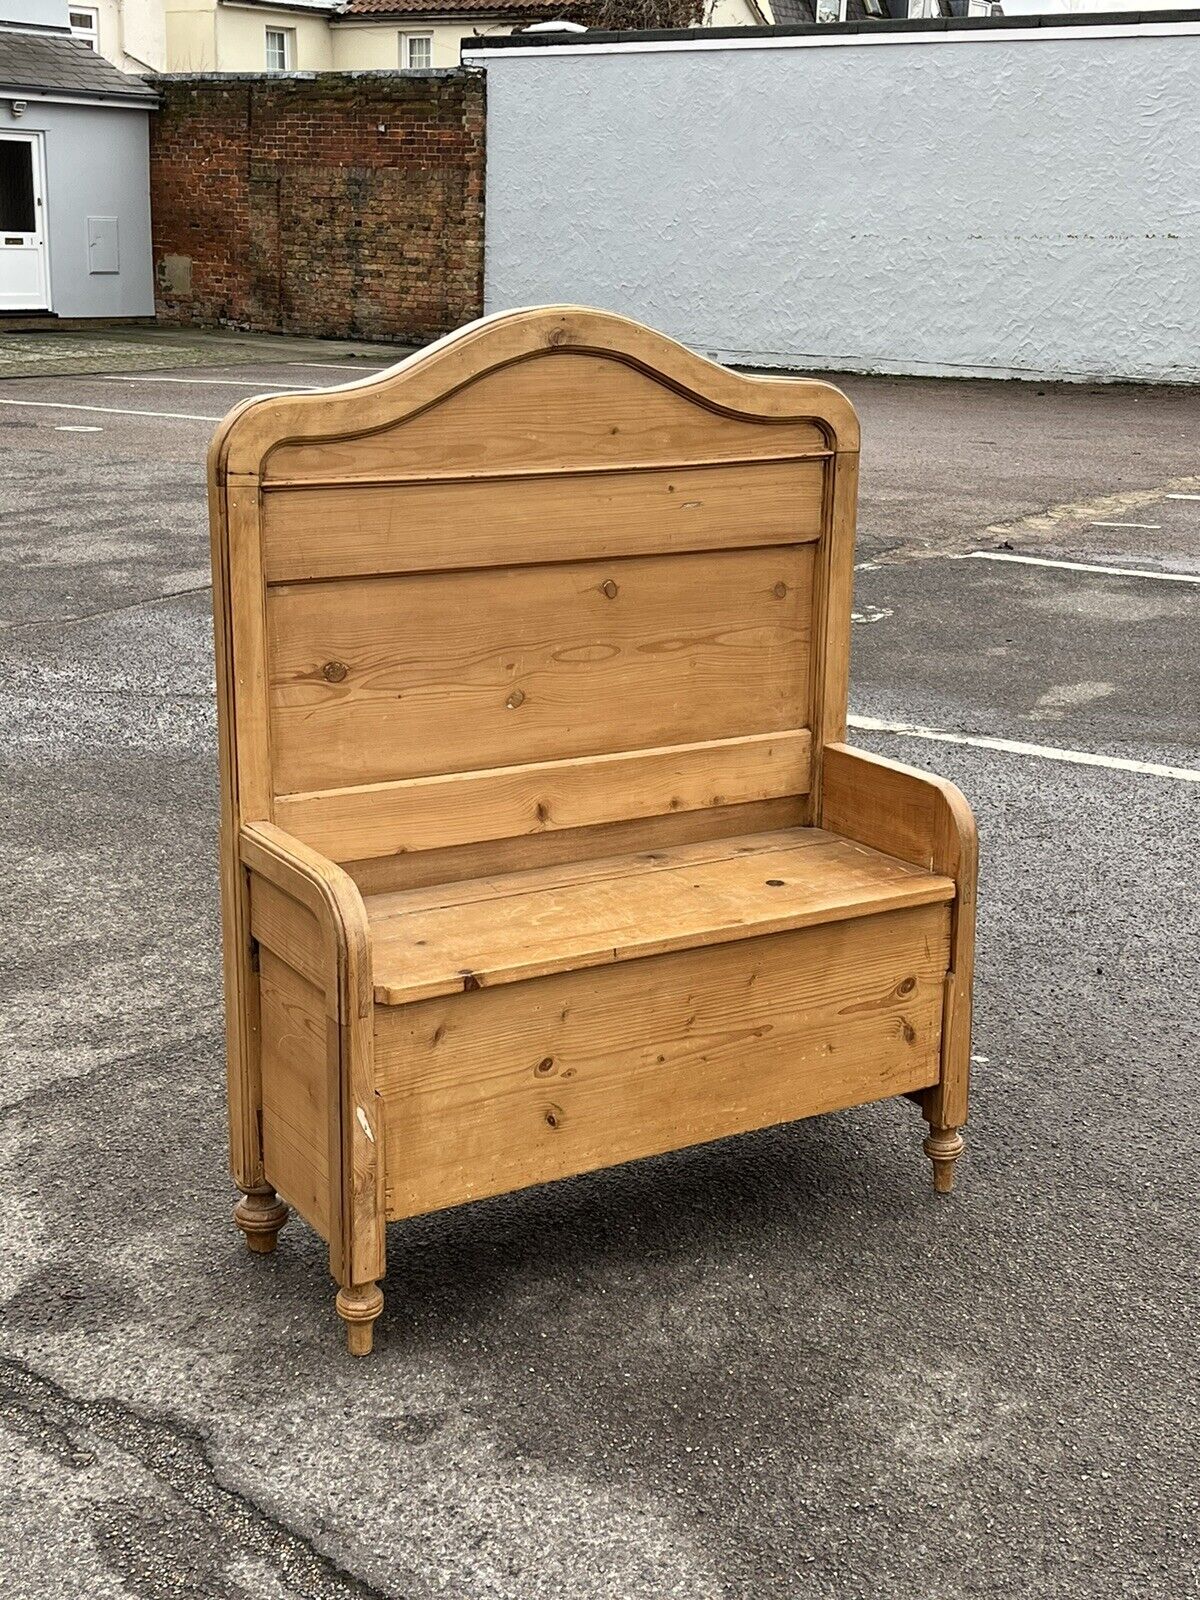 Victorian Pine Hall Bench With Shoe Cupboard.